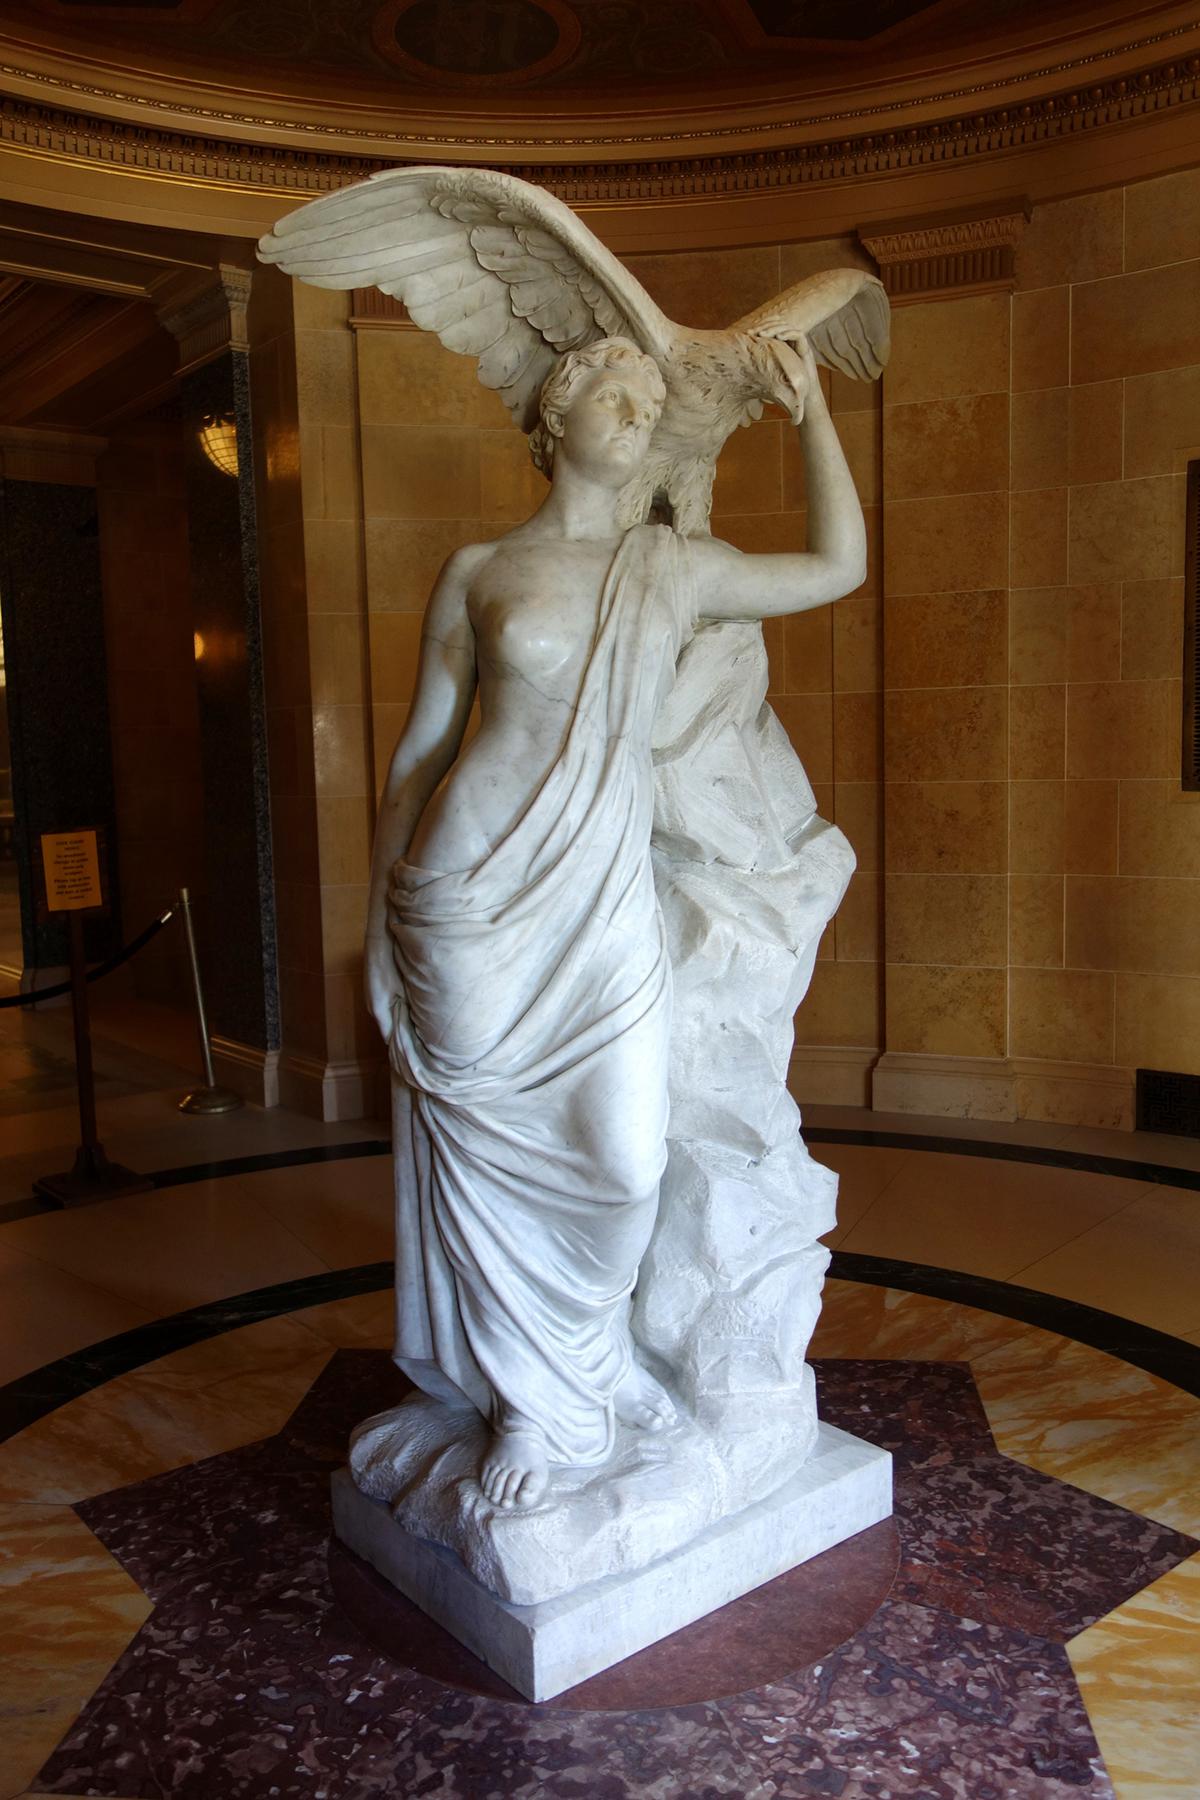 First exhibited at the World's Columbian Exposition in 1893, "Genius of Wisconsin" by Helen Farnsworth Mears is housed at the Wisconsin State Capitol building in Madison, Wisconsin. (Public Domain)